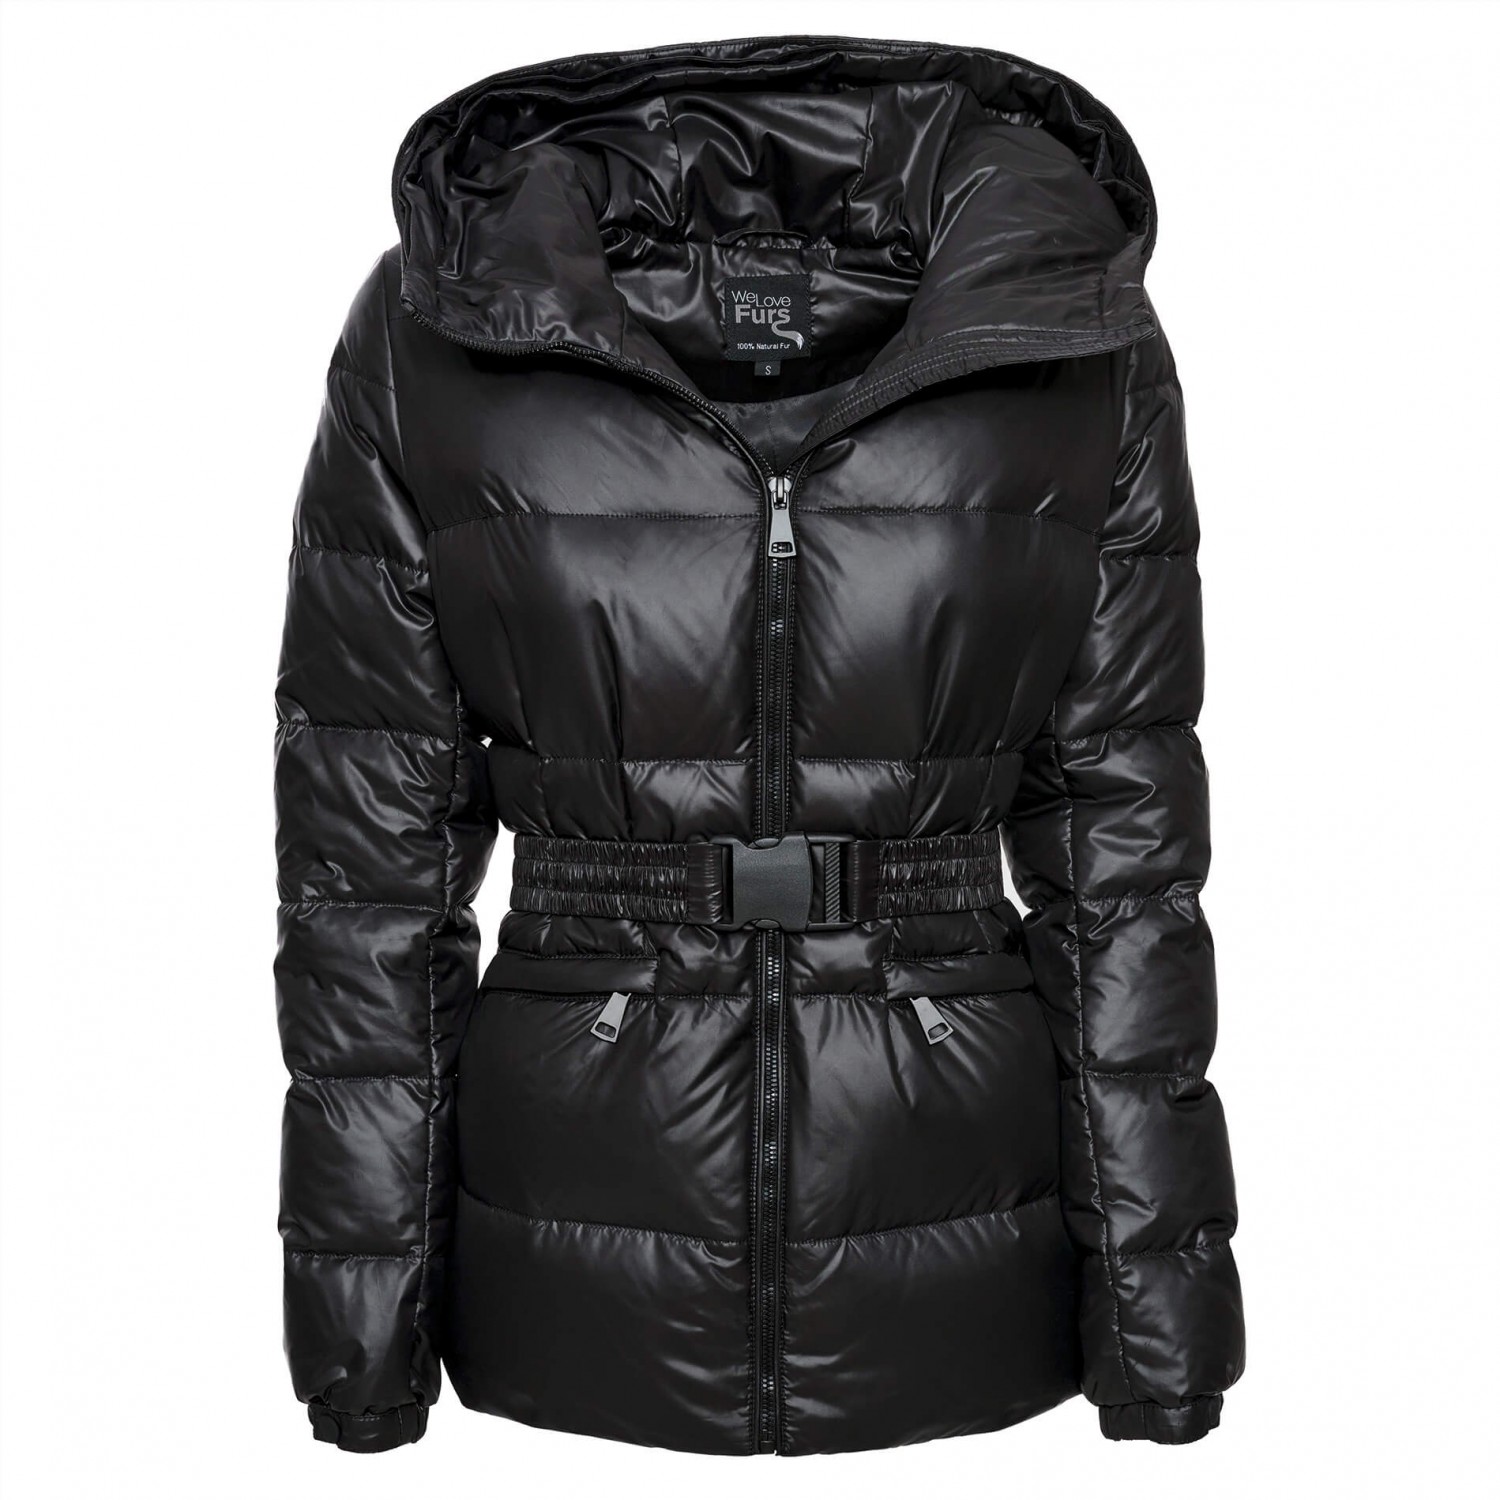 Puffer jacket with real fur hood black